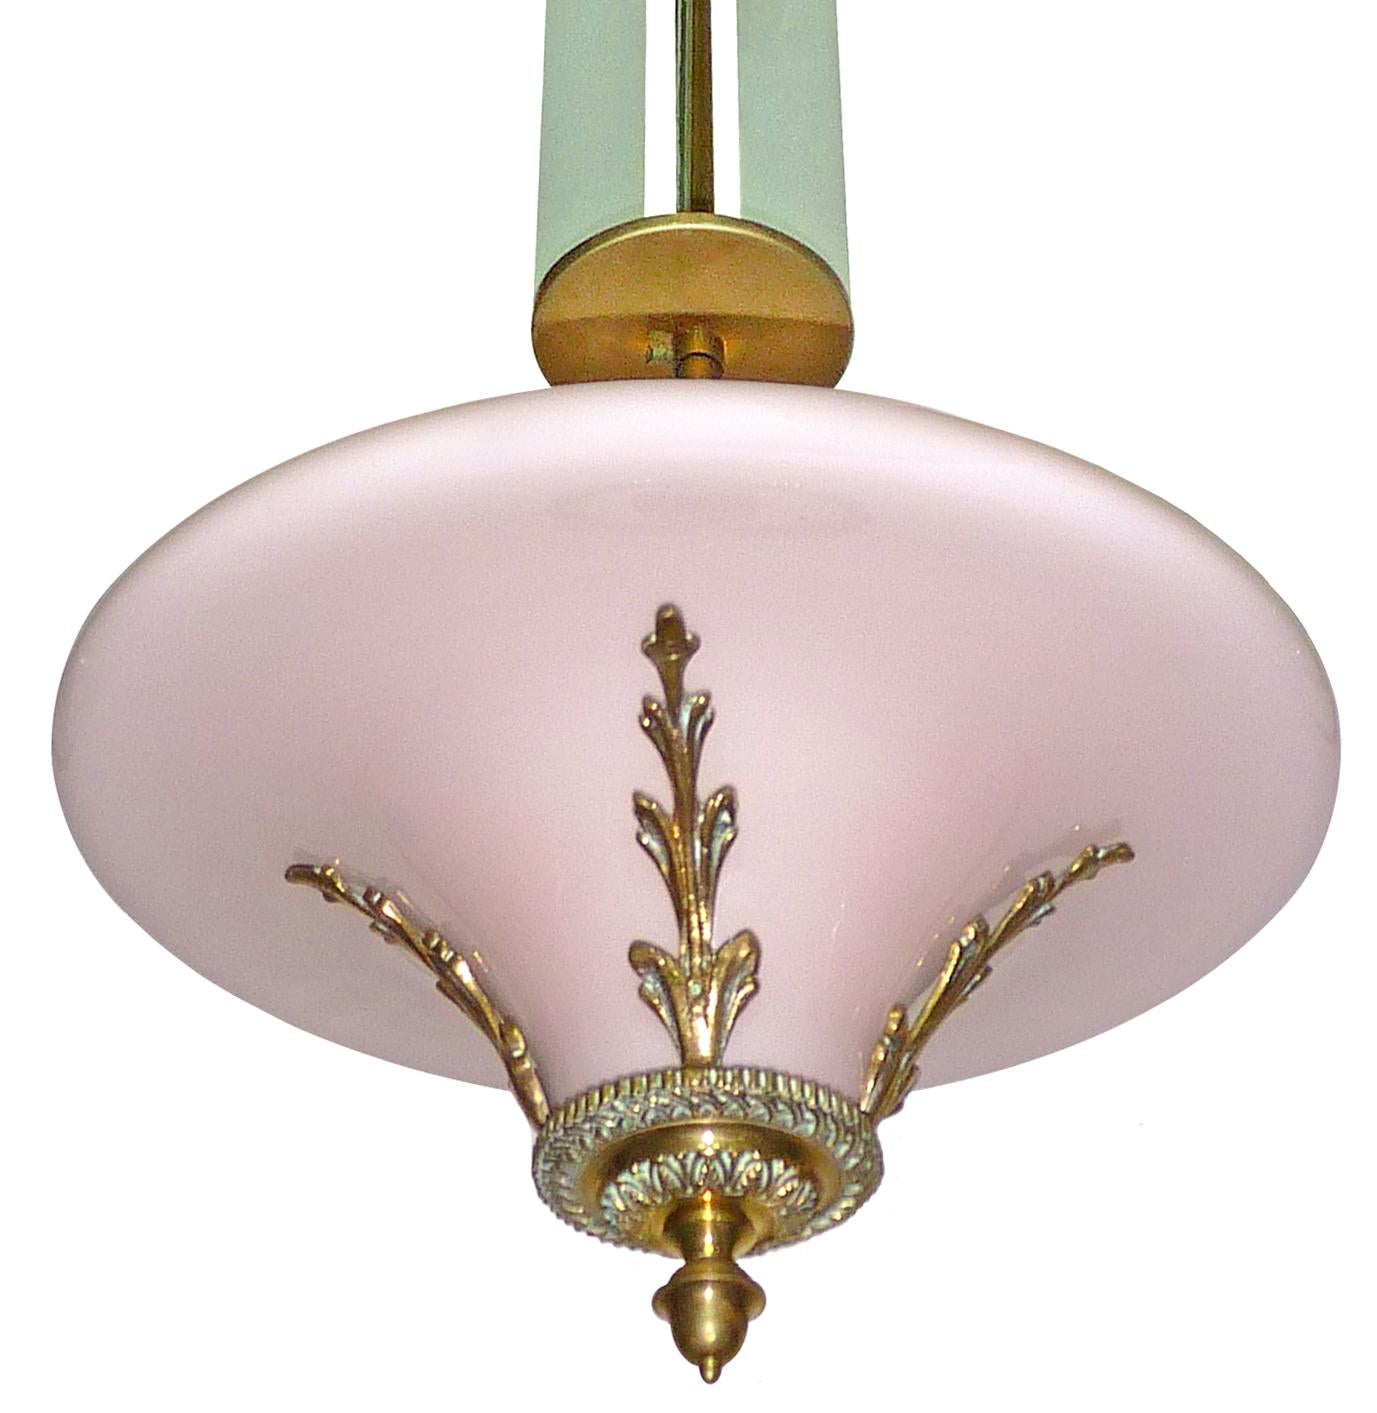 Antique pink French Art Deco or Art Nouveau bronze and opaline glass hanging chandelier in the style of Petitot with four frosted glass strips each, circa 1920.
Beautiful age patina
Measures:
Diameter 15 in / 36 cm
Height 36 in / 90 cm
Weight 7 lb.